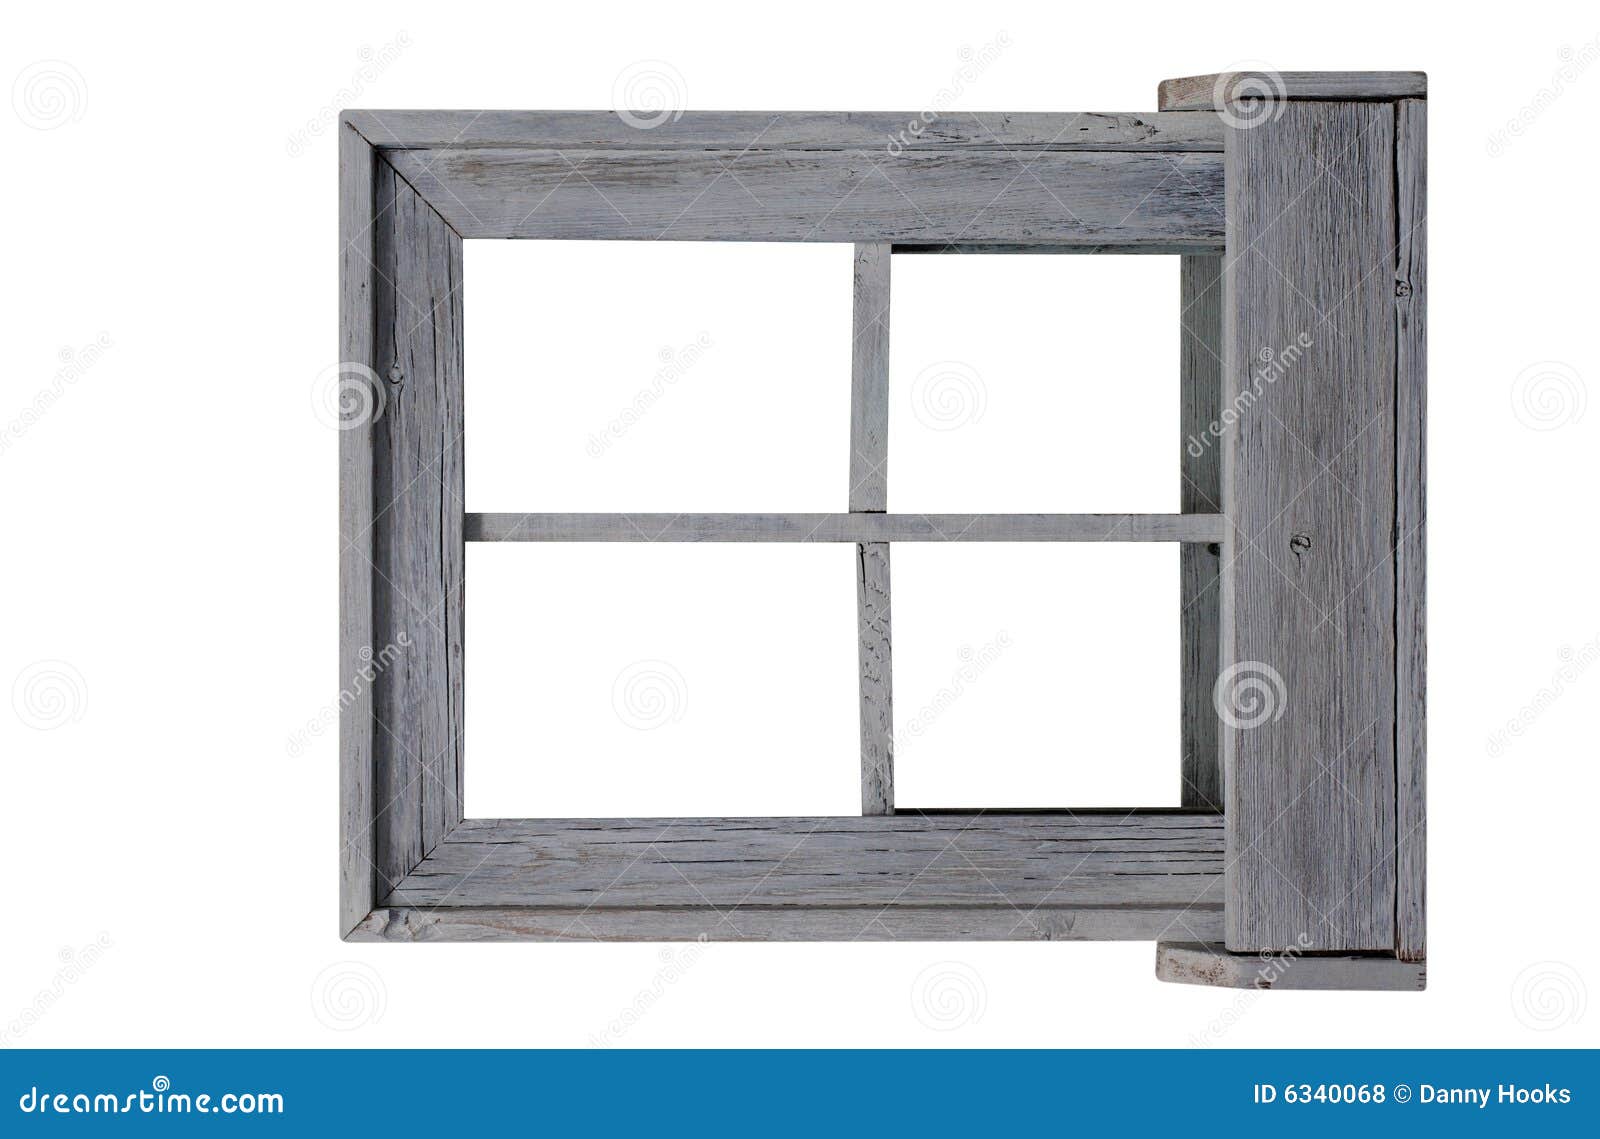 Wooden Window stock photo. Image of opening, clipping - 6340068